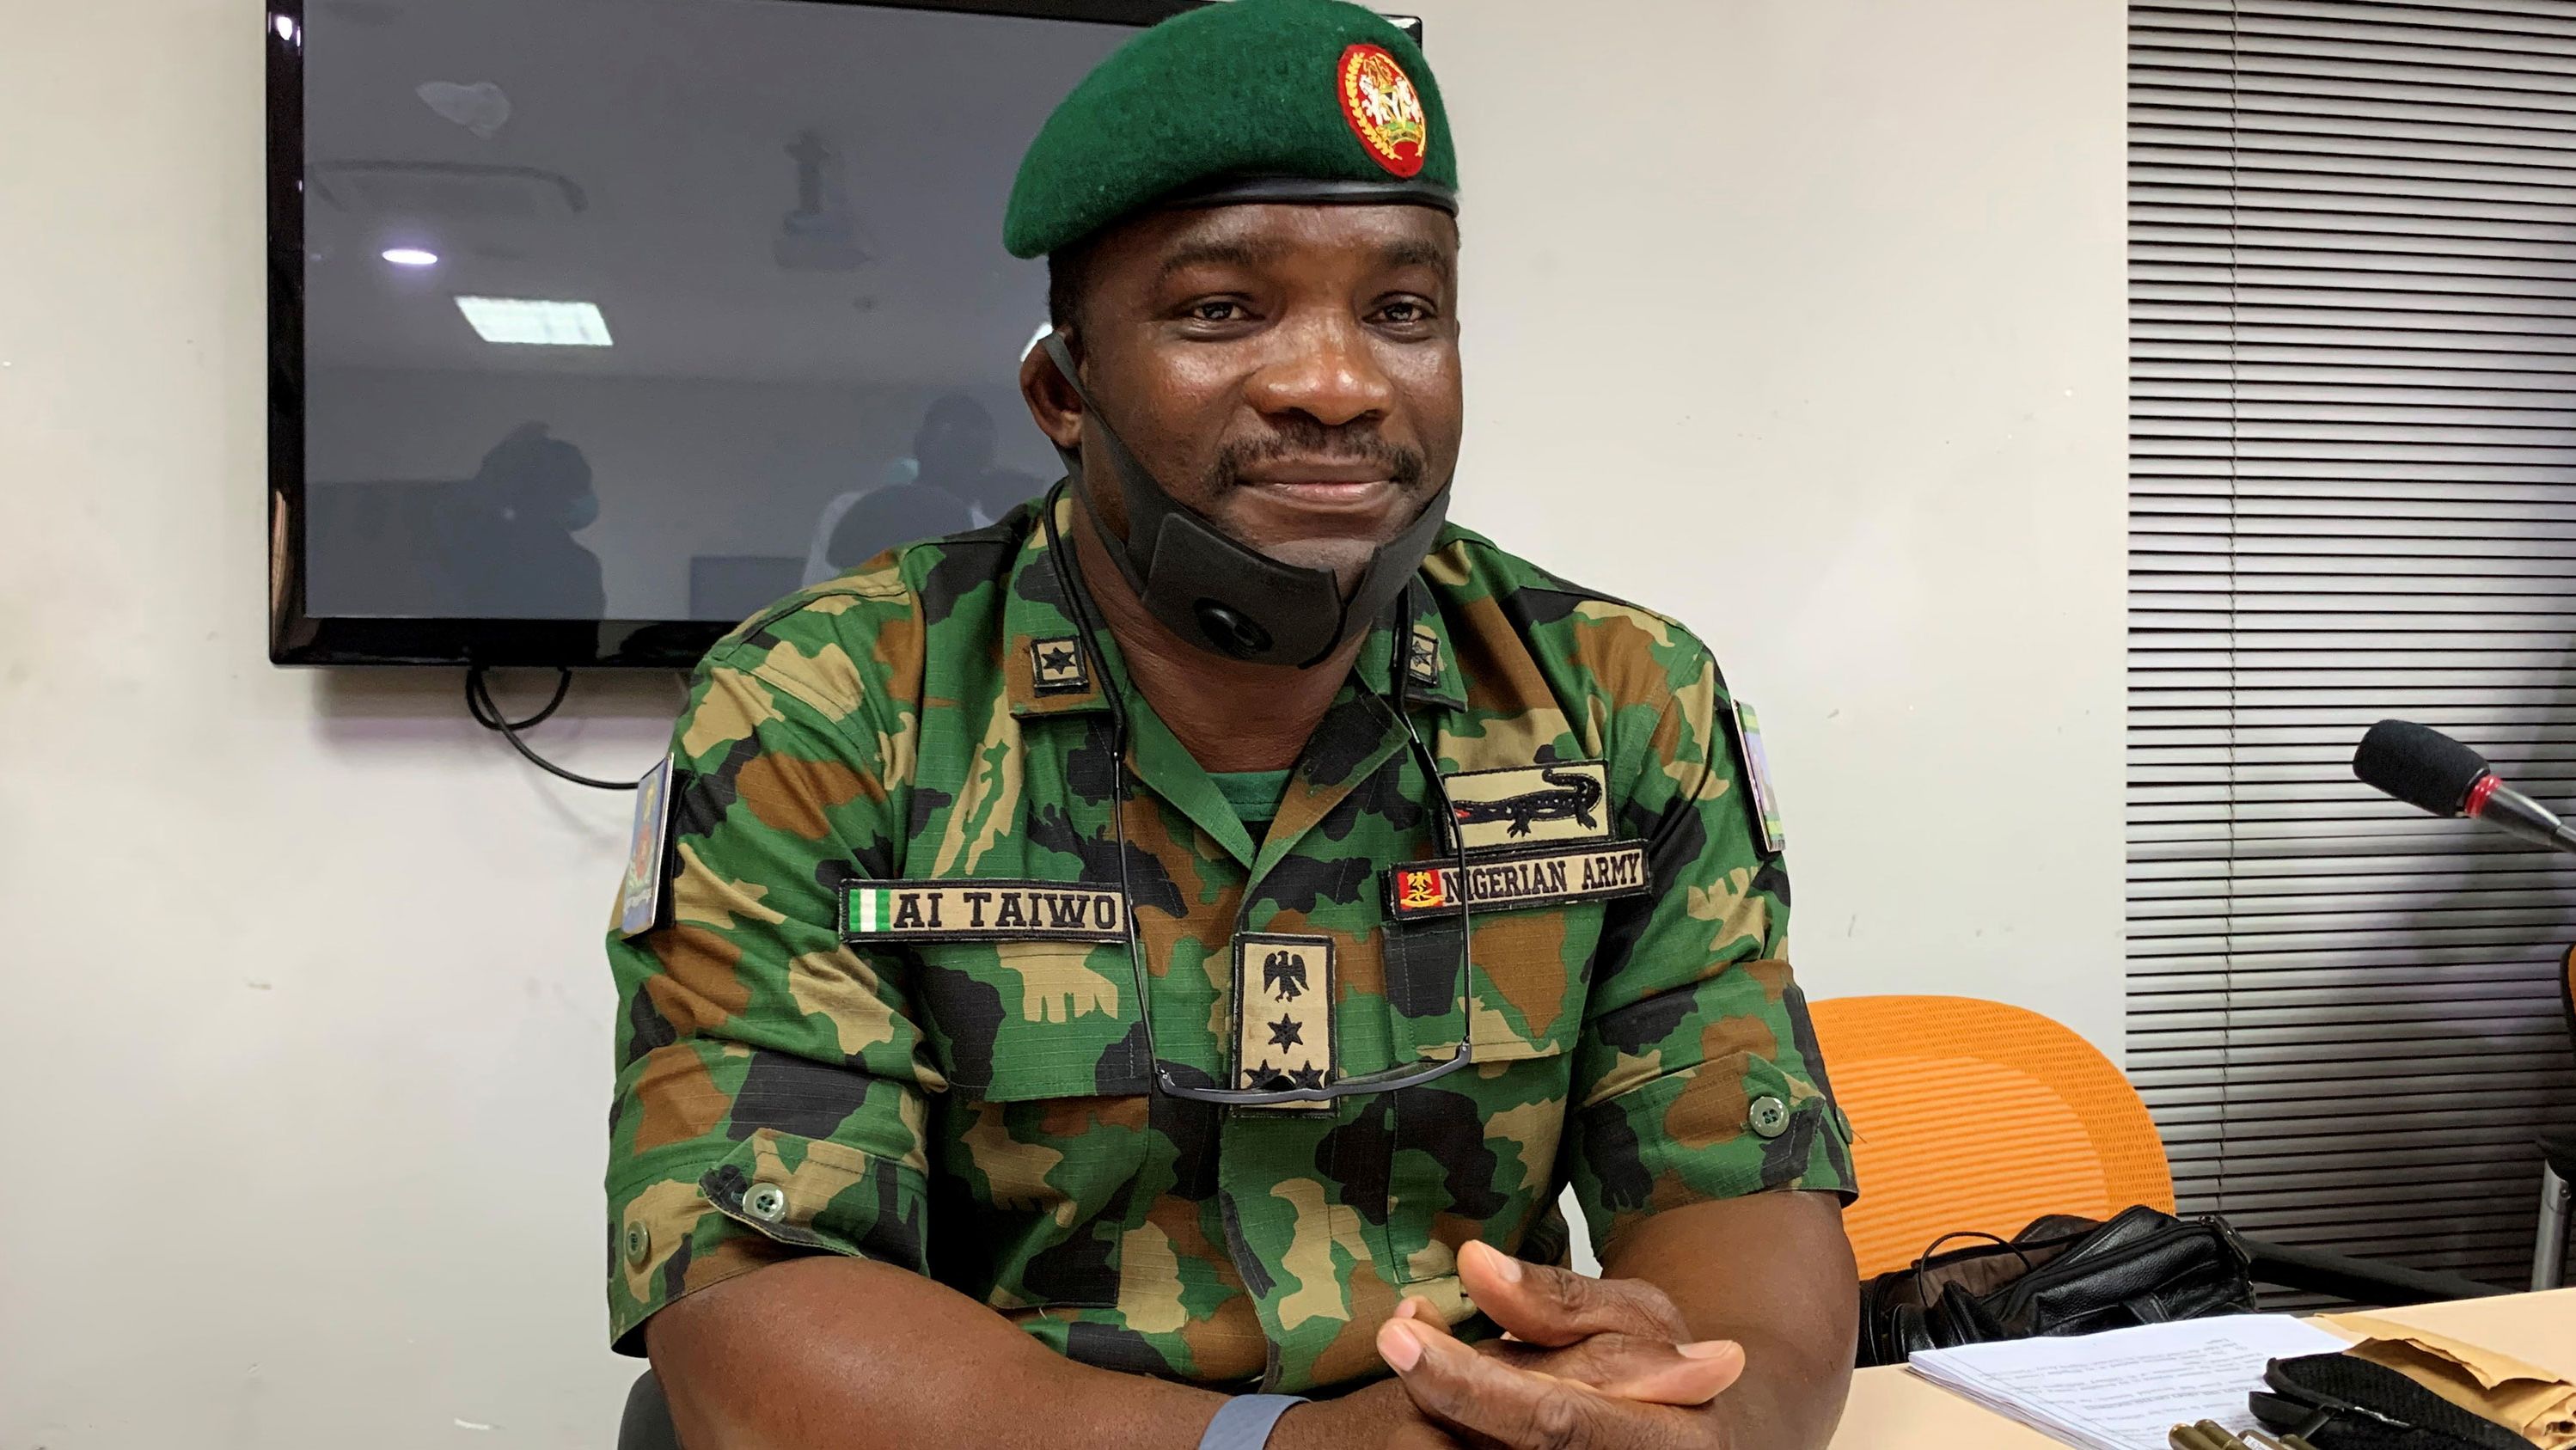 Brig. Gen. Ahmed Taiwo attends a judicial panel  investigating the shooting of protesters in Lagos, Nigeria, on November 14, 2020.